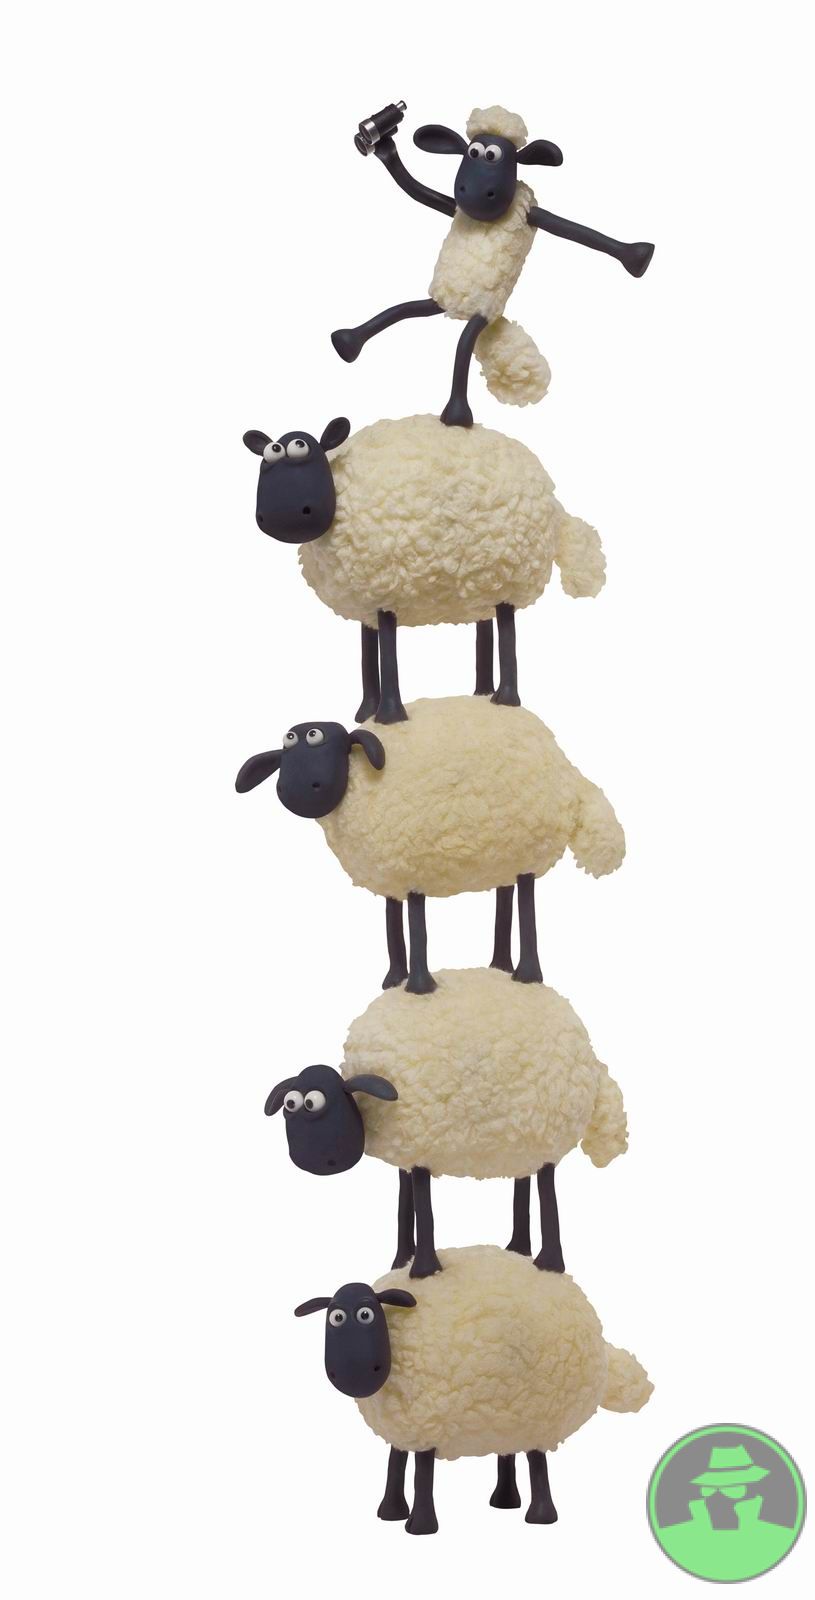 Free Download Shaun The Sheep Screenshots Pictures Wallpapers Nintendo Ds Ign 815x1600 For Your Desktop Mobile Tablet Explore 76 Shaun The Sheep Wallpaper Sheep Wallpaper Desktop Hd Sheep Wallpaper